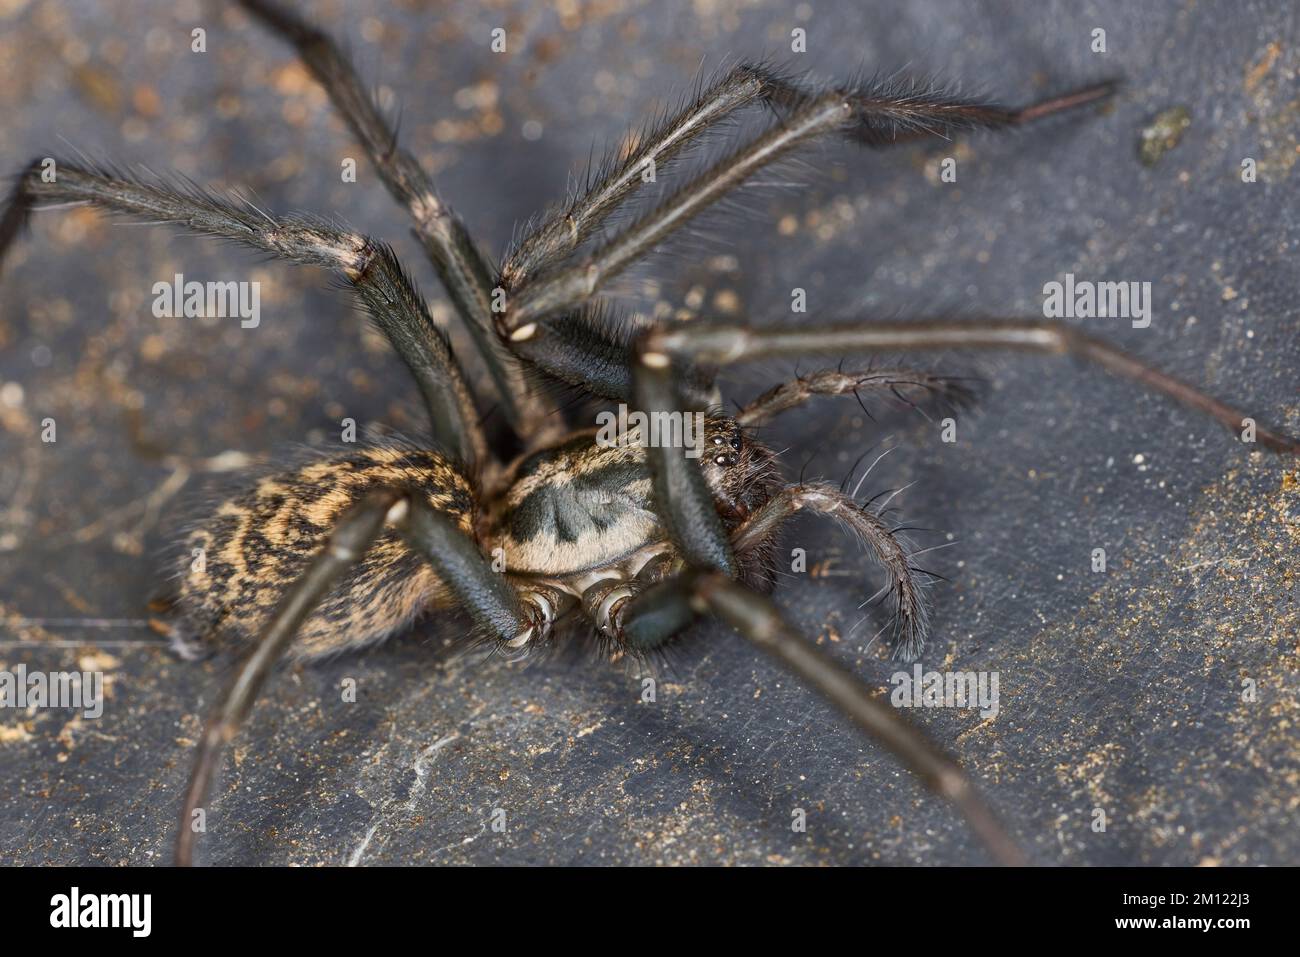 Spider, giant house spider Stock Photo